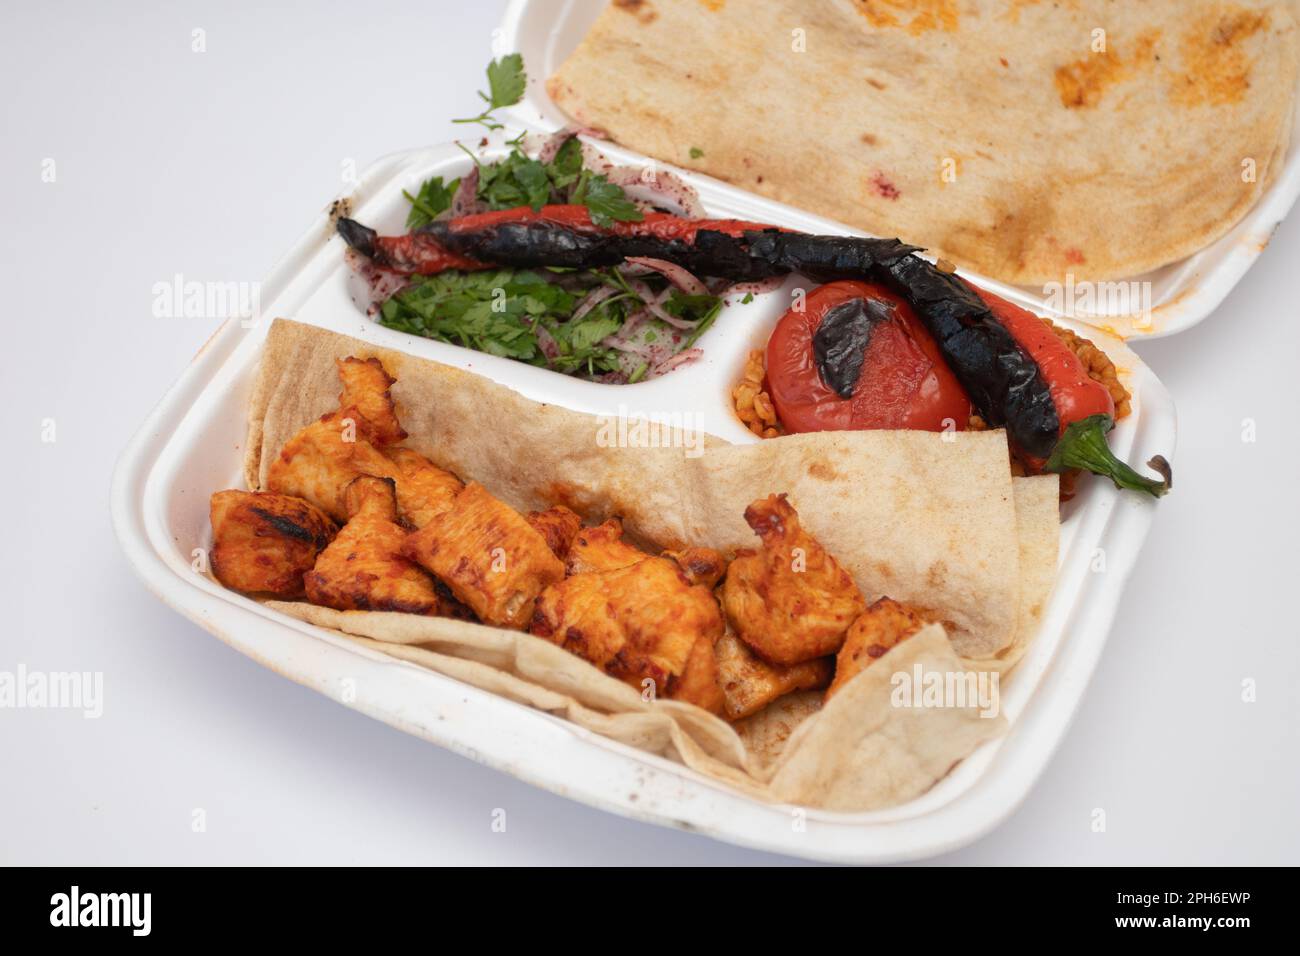 Shish kebab and pita bread on a disposable plate. Food delivery. Stock Photo